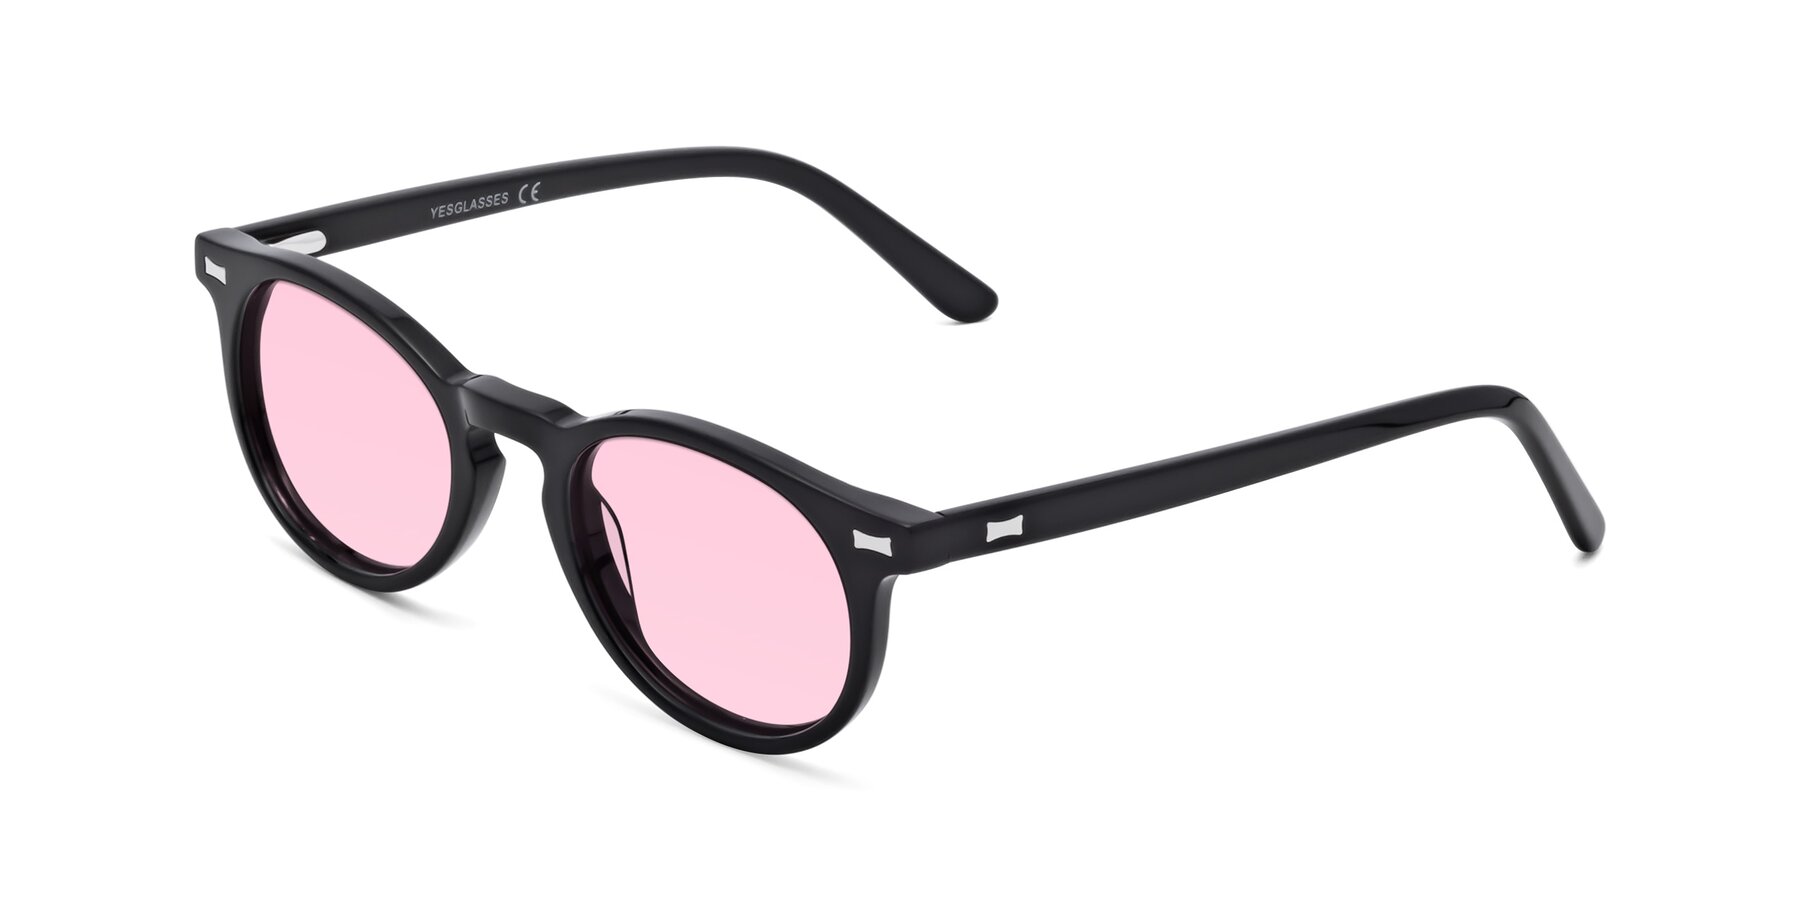 Angle of 17330 in Black with Light Pink Tinted Lenses